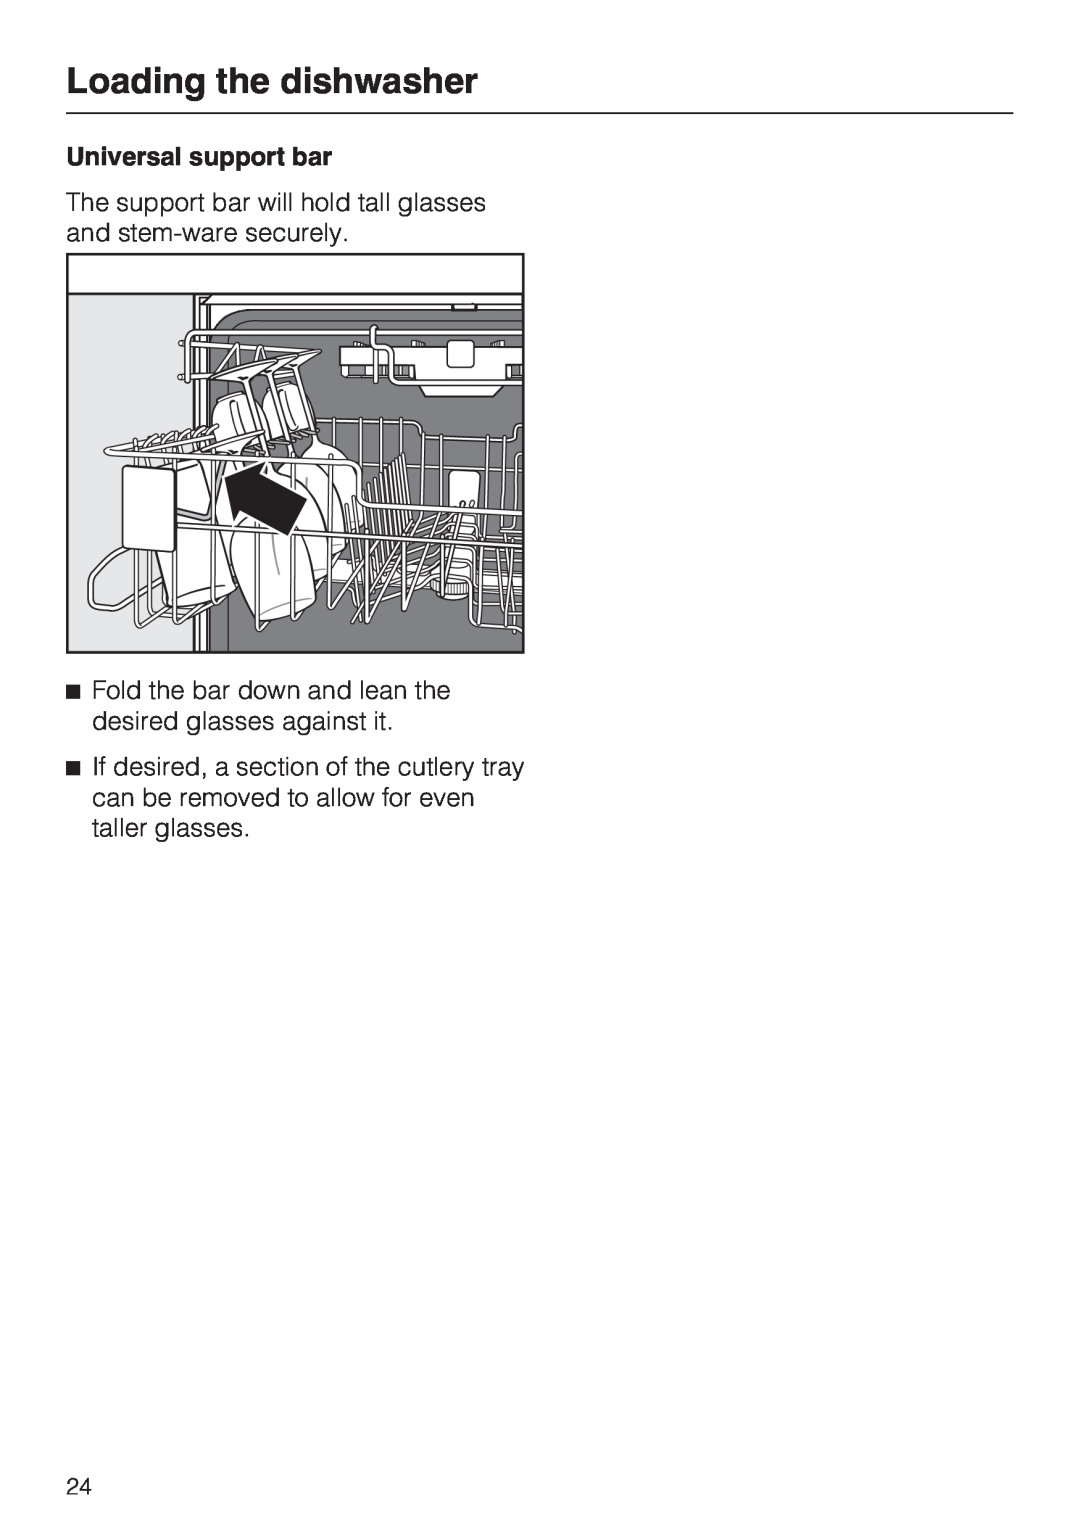 Miele G 2872 operating instructions Loading the dishwasher, Universal support bar 